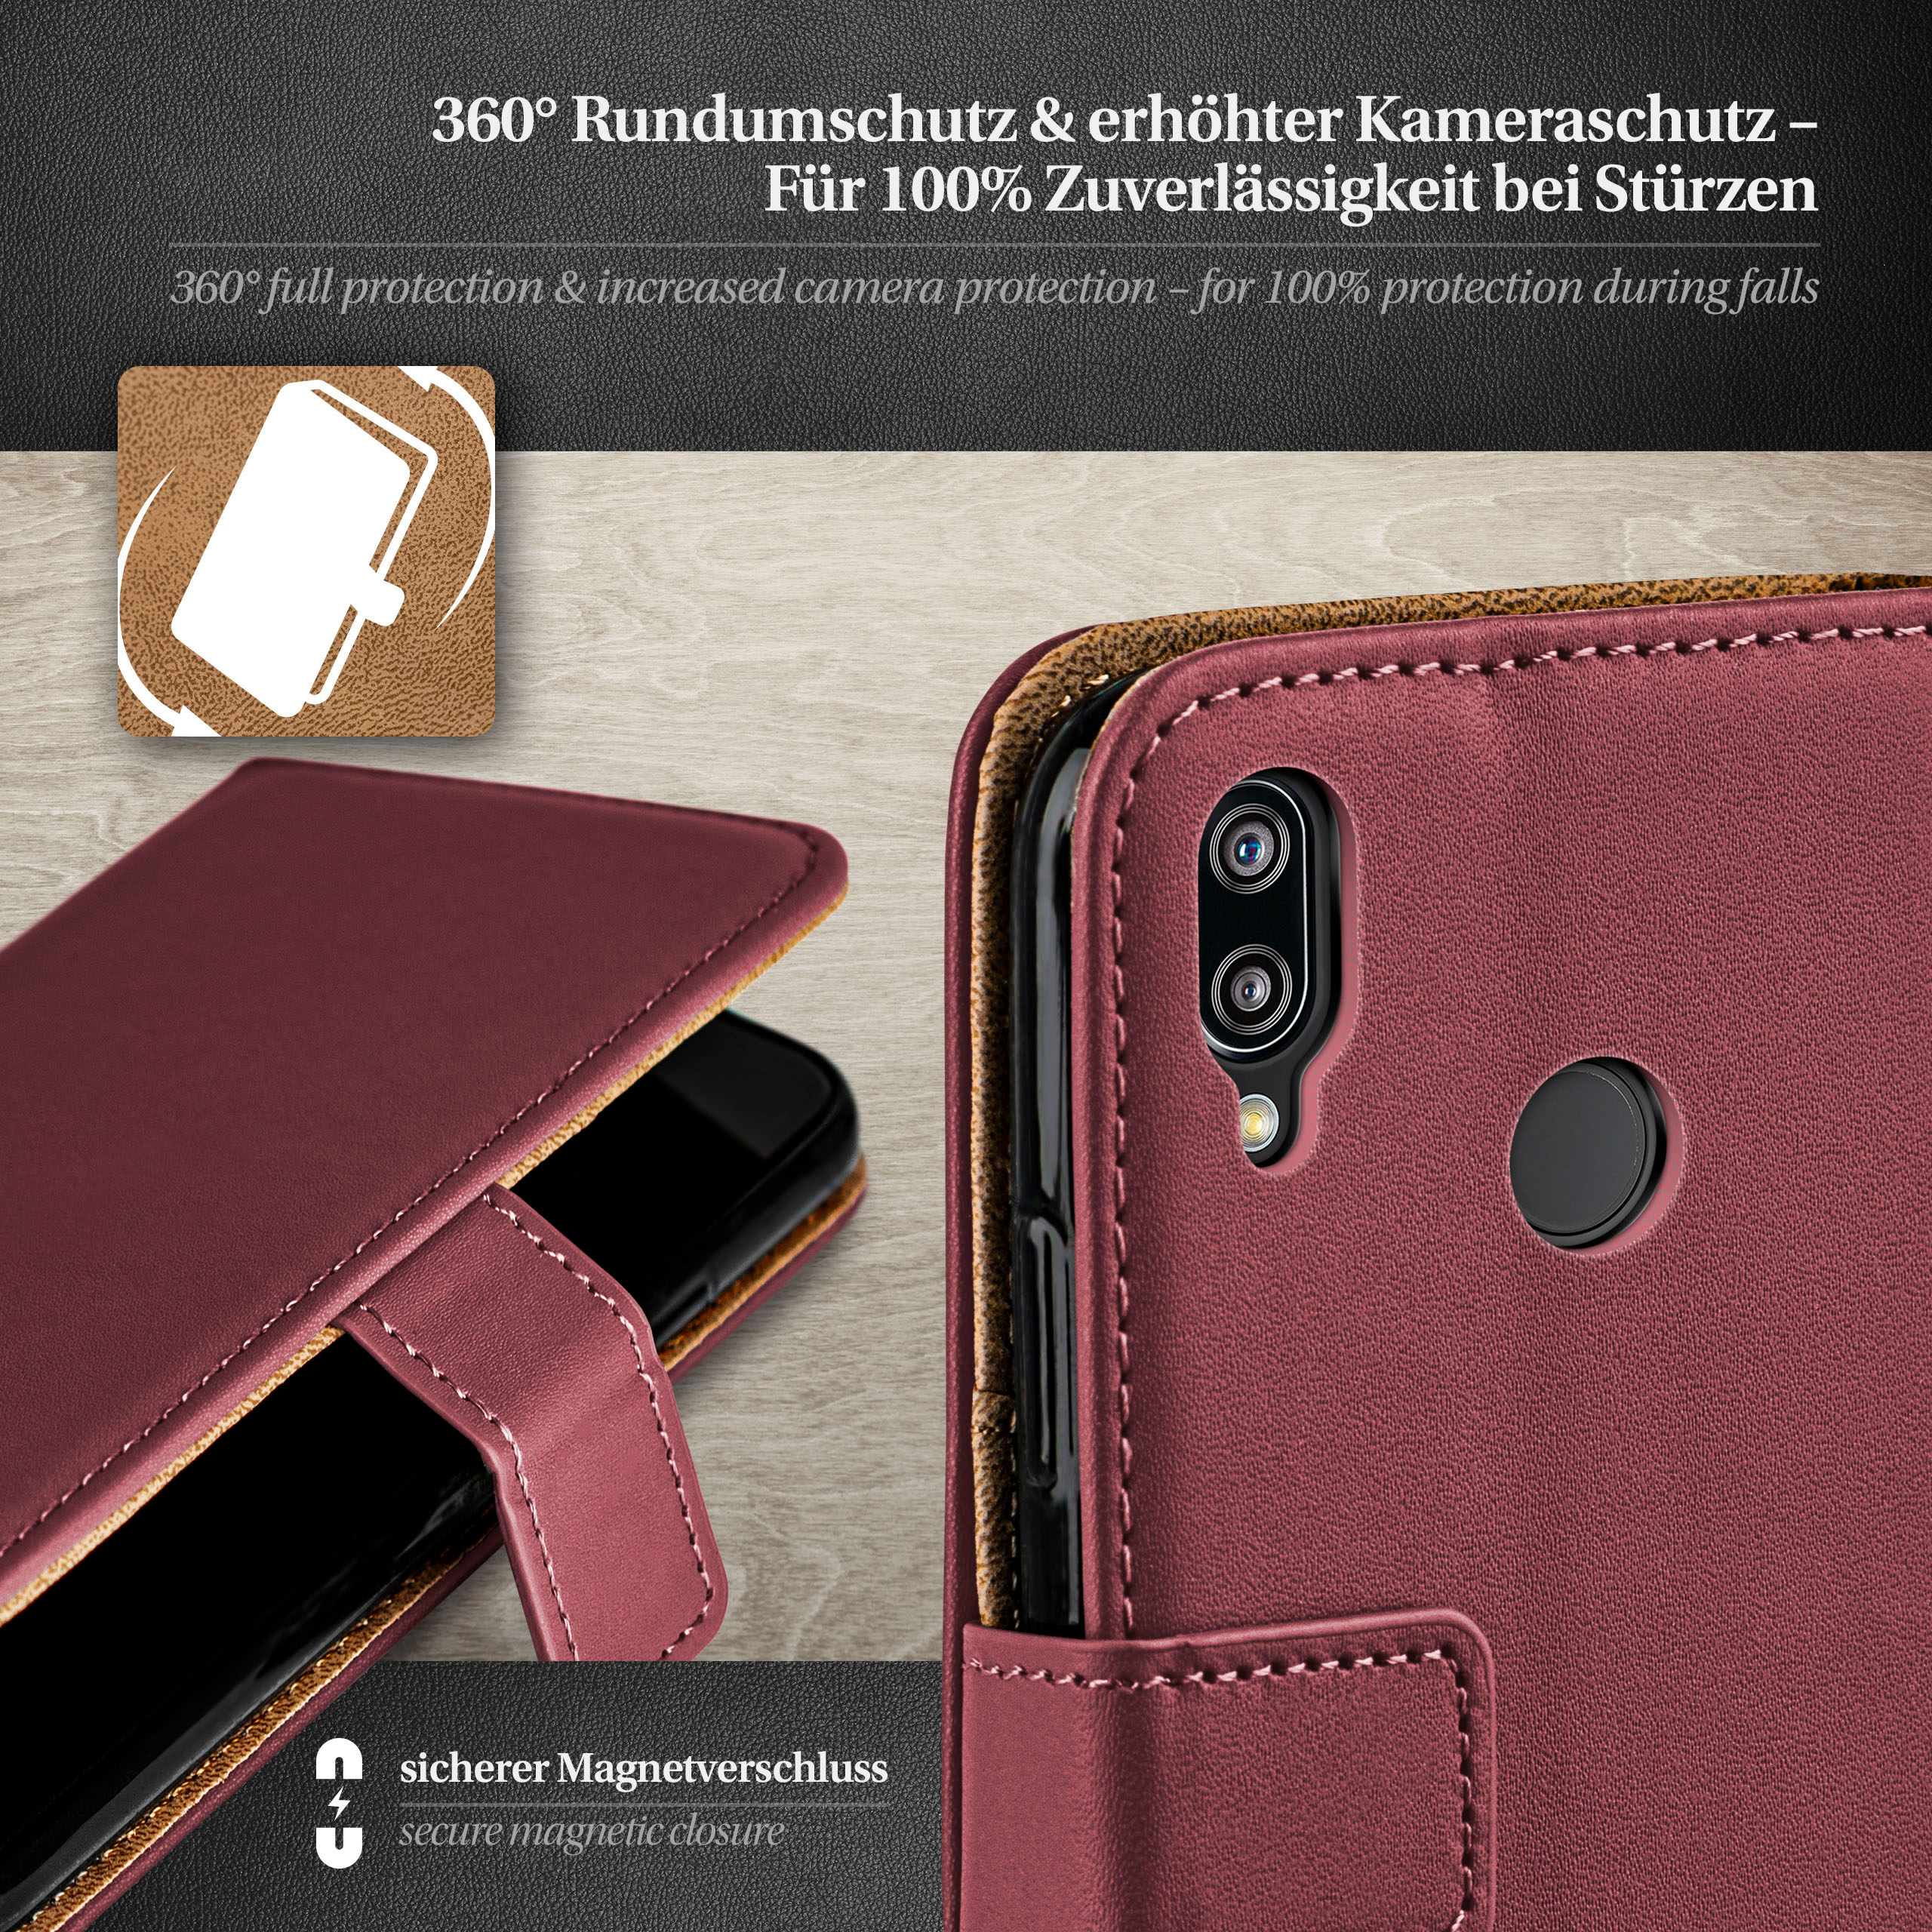 MOEX Book Huawei, Maroon-Red Lite, Case, Bookcover, P20